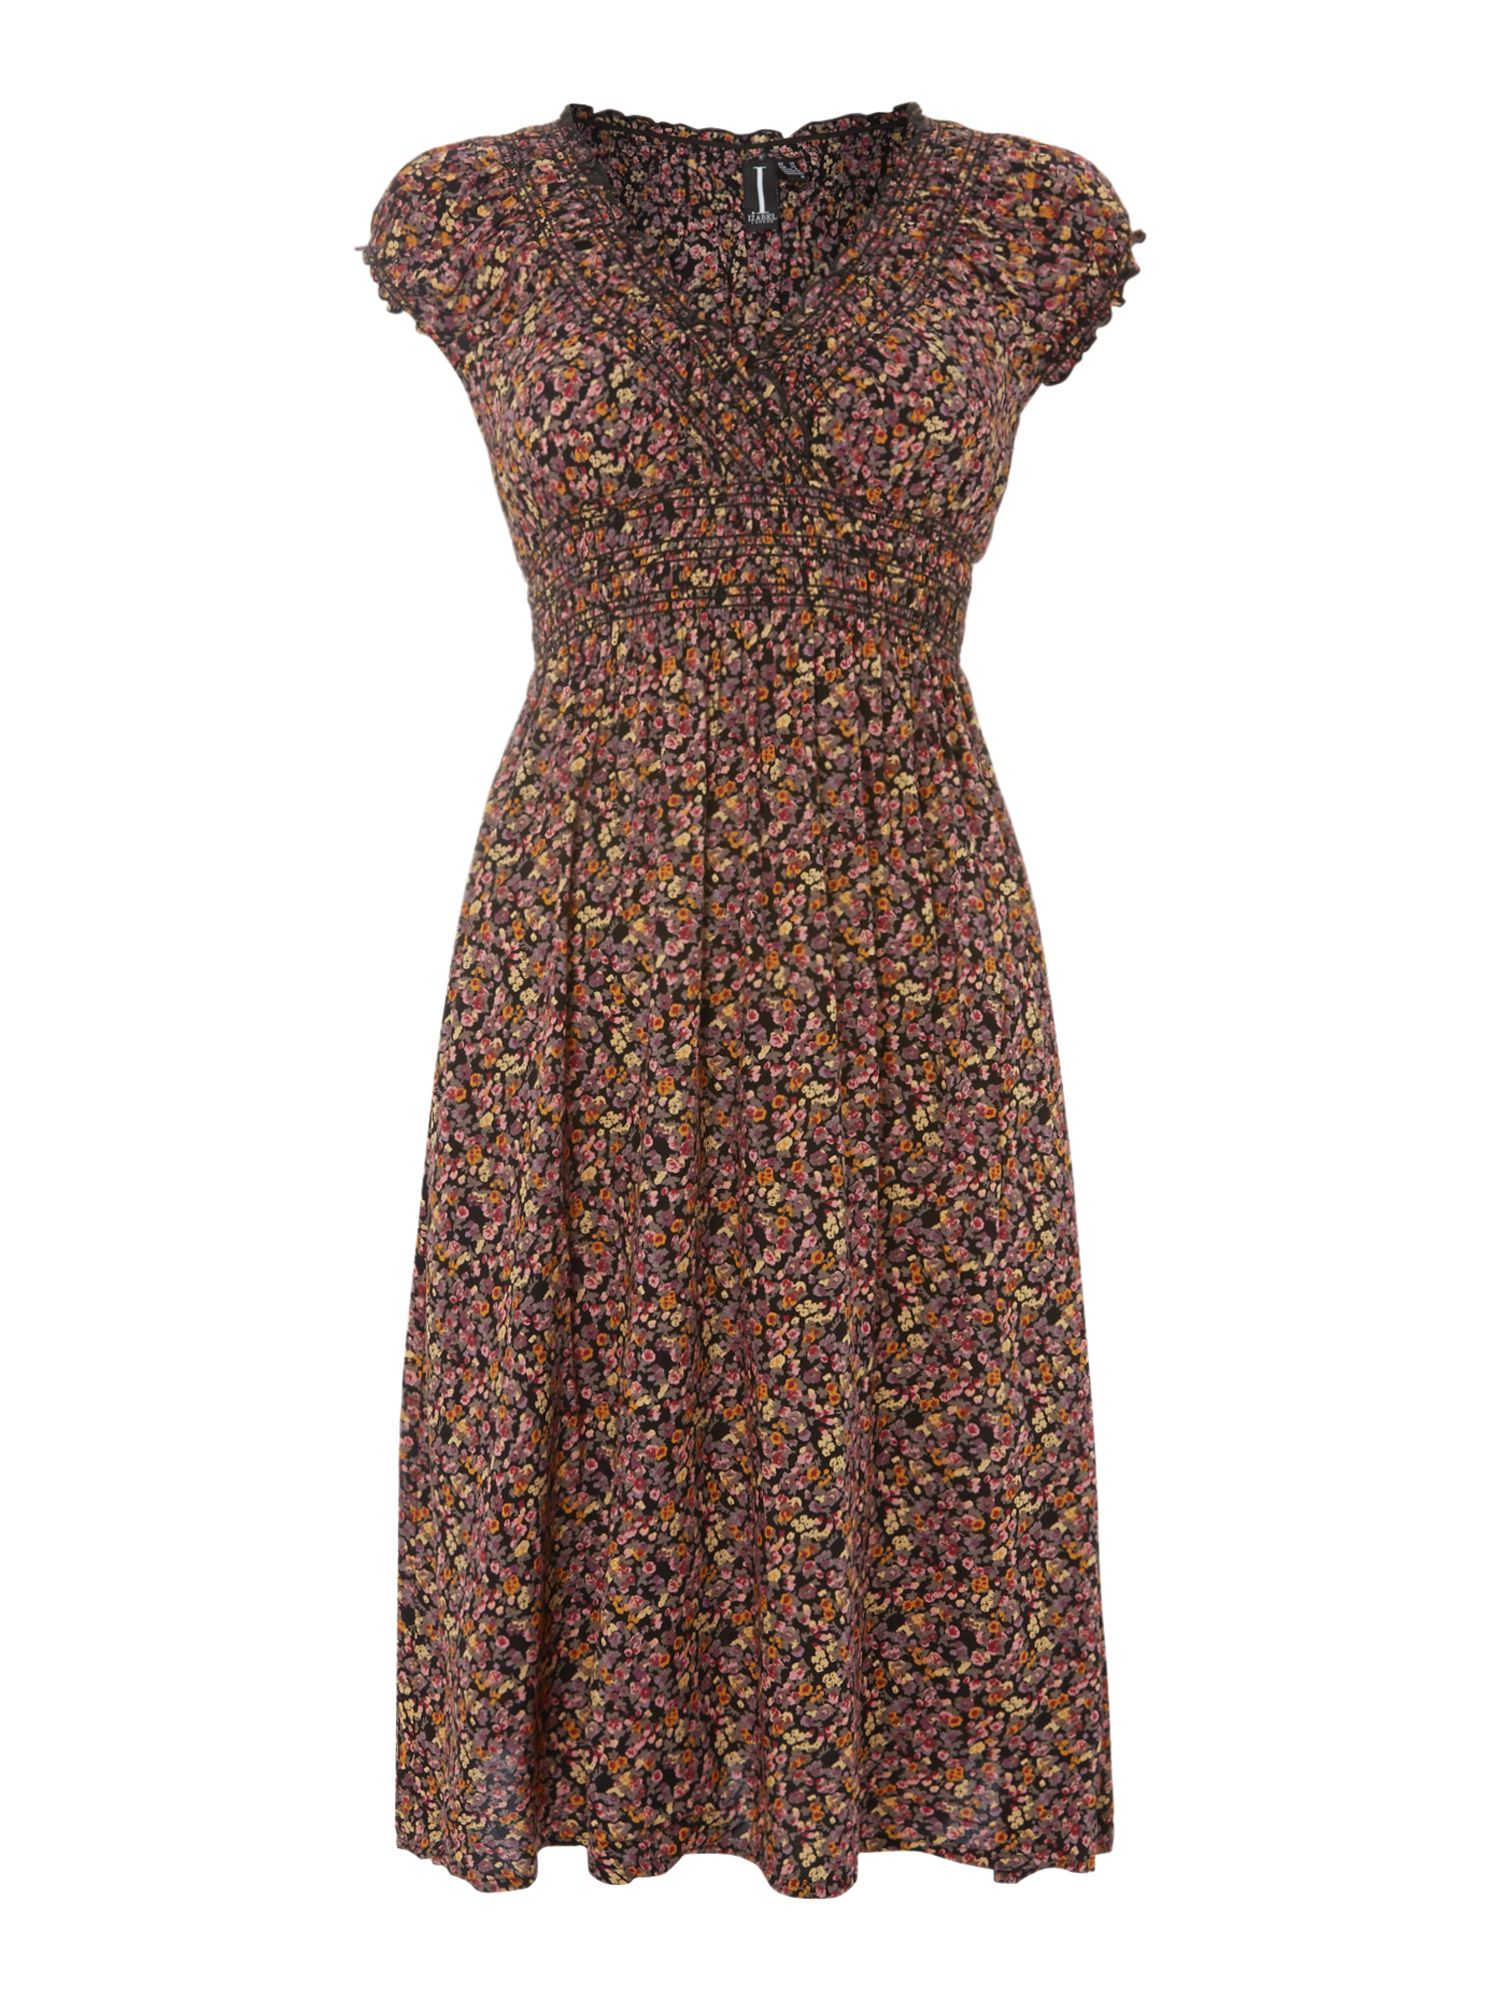 Izabel London Ditsy Floral Print Dress in Brown (Multi-Coloured) | Lyst